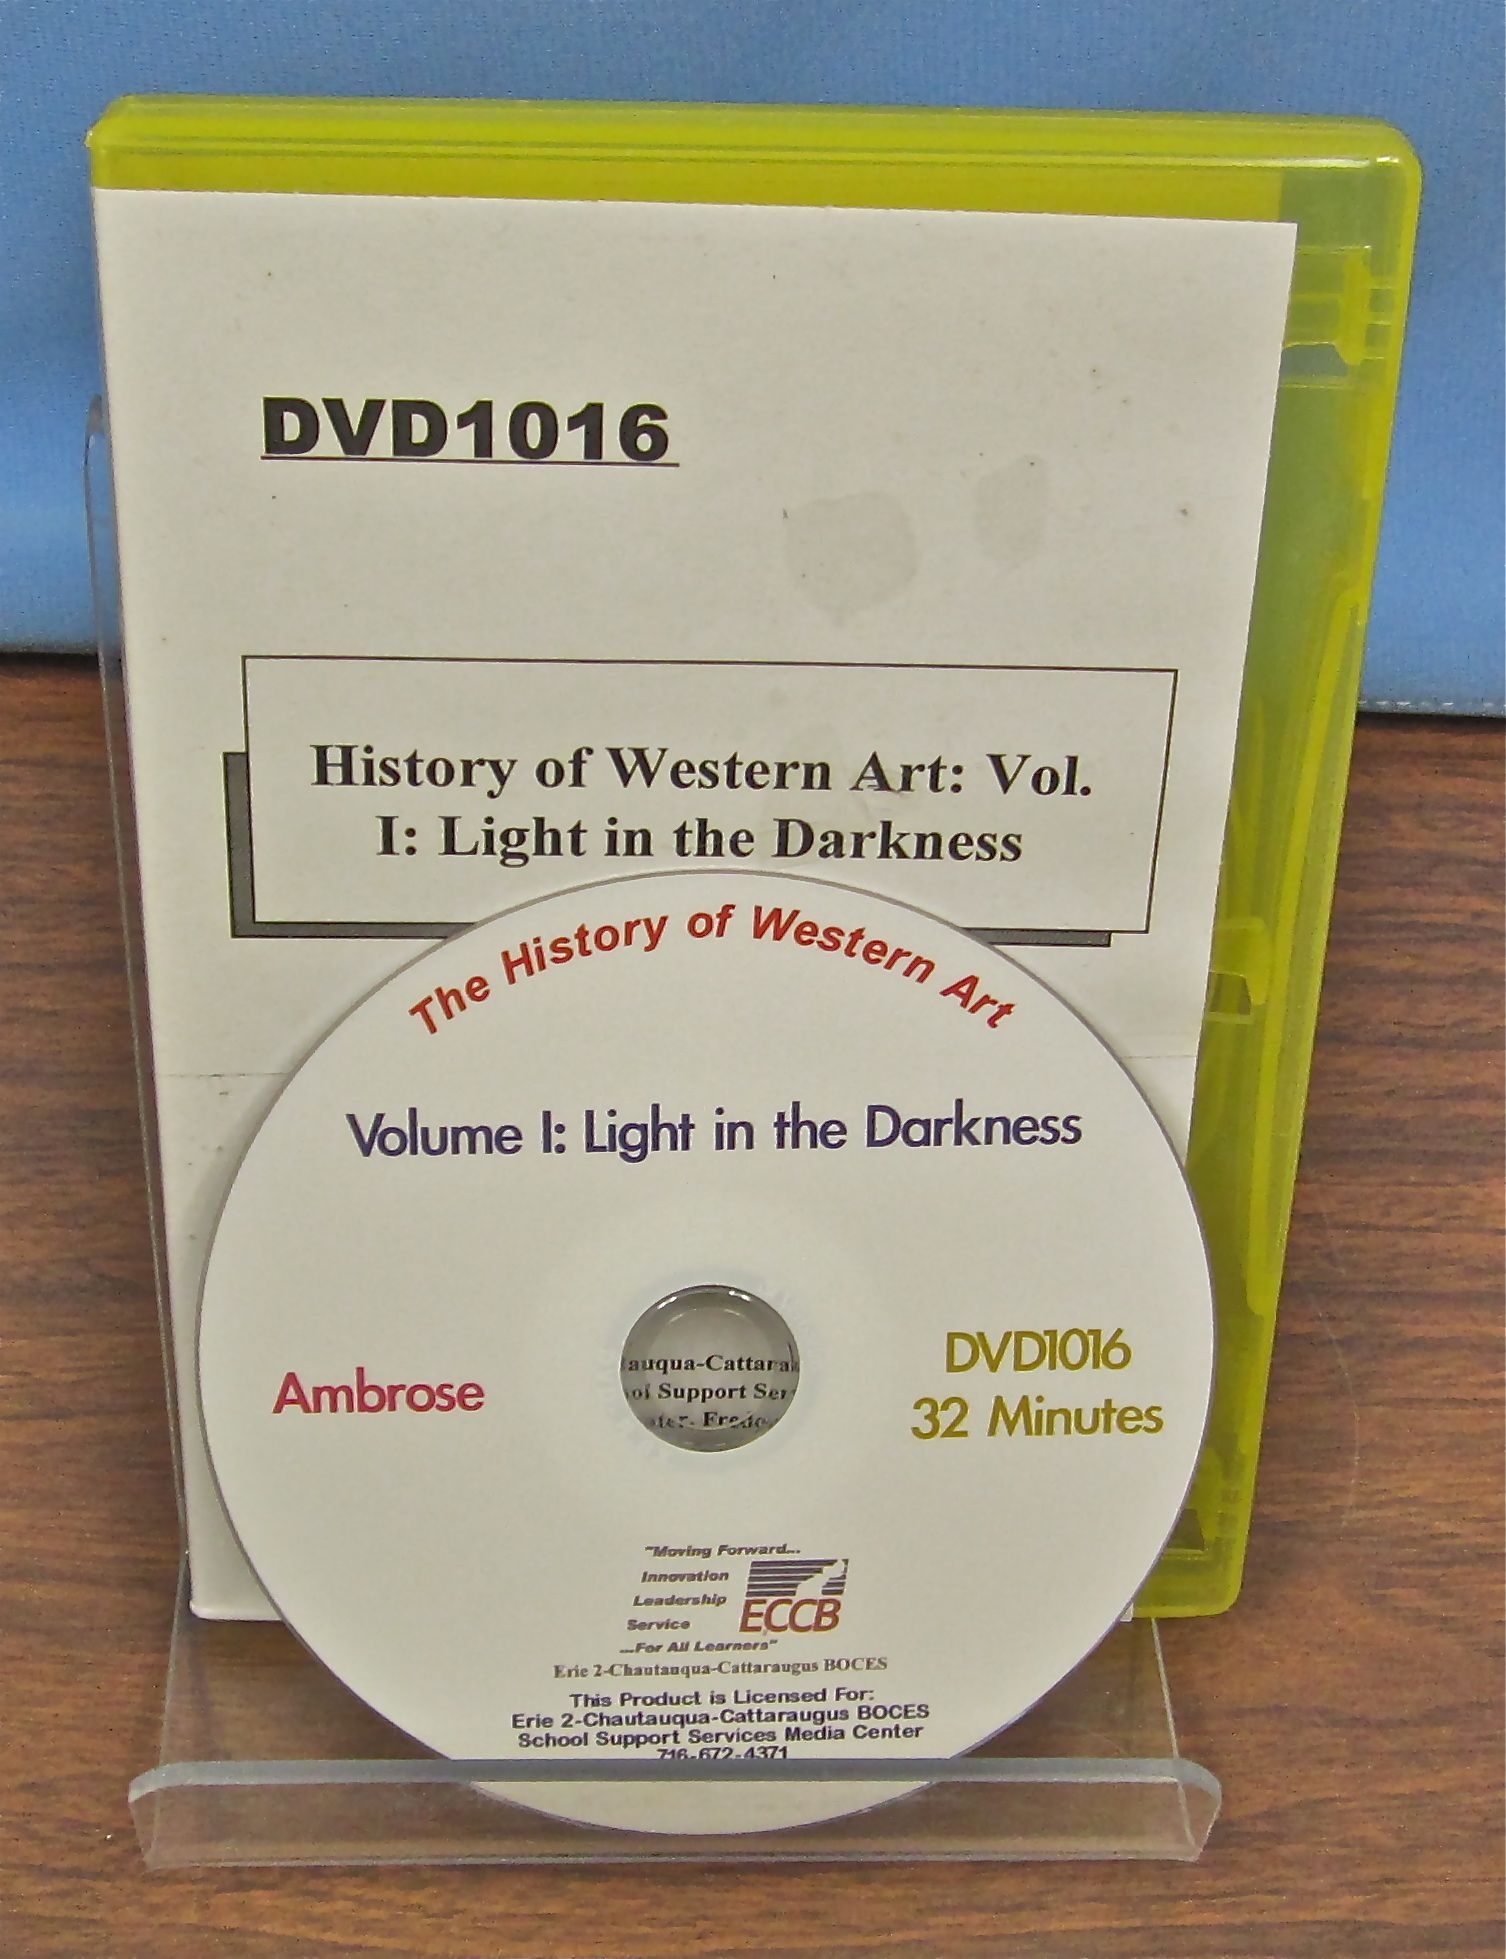 History of Western Art: Vol. I: Light in the Darkness